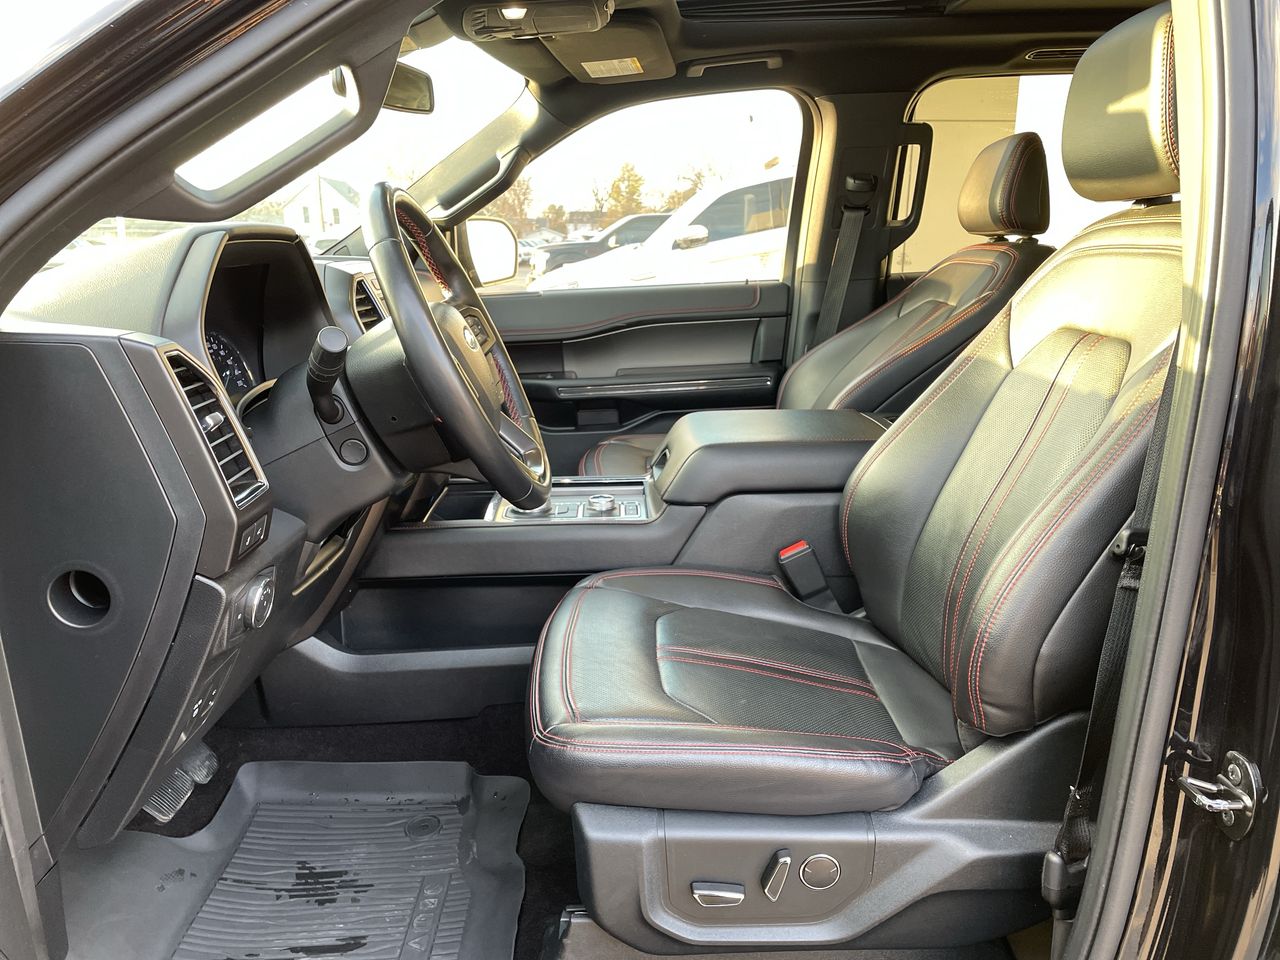 2021 Ford Expedition - 21452B Full Image 11